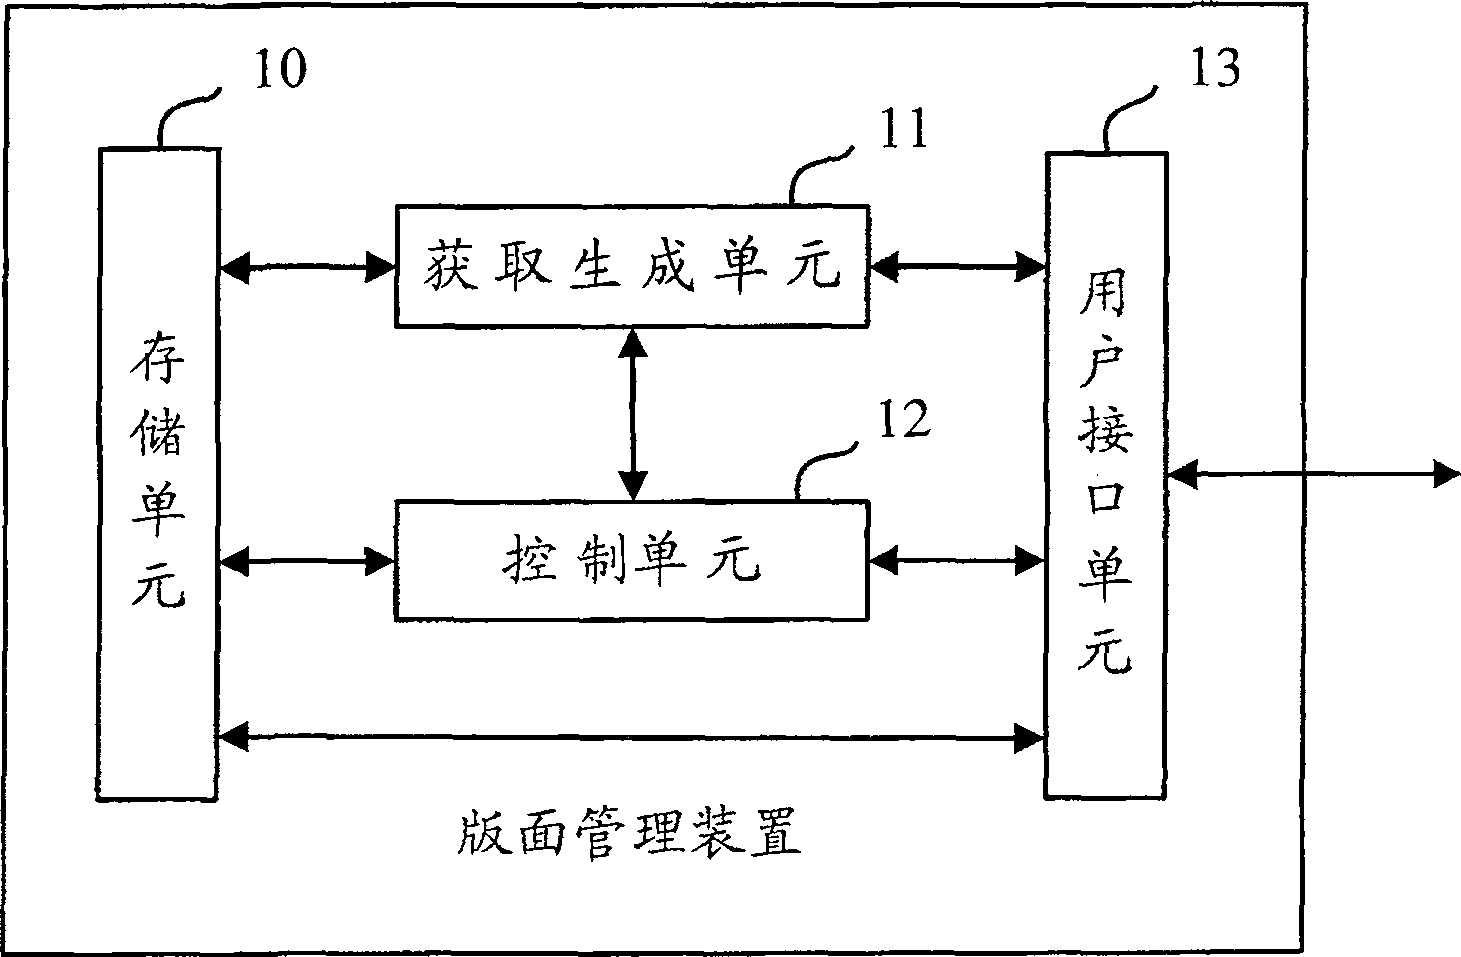 Method and device for making electric newspaper printing plate